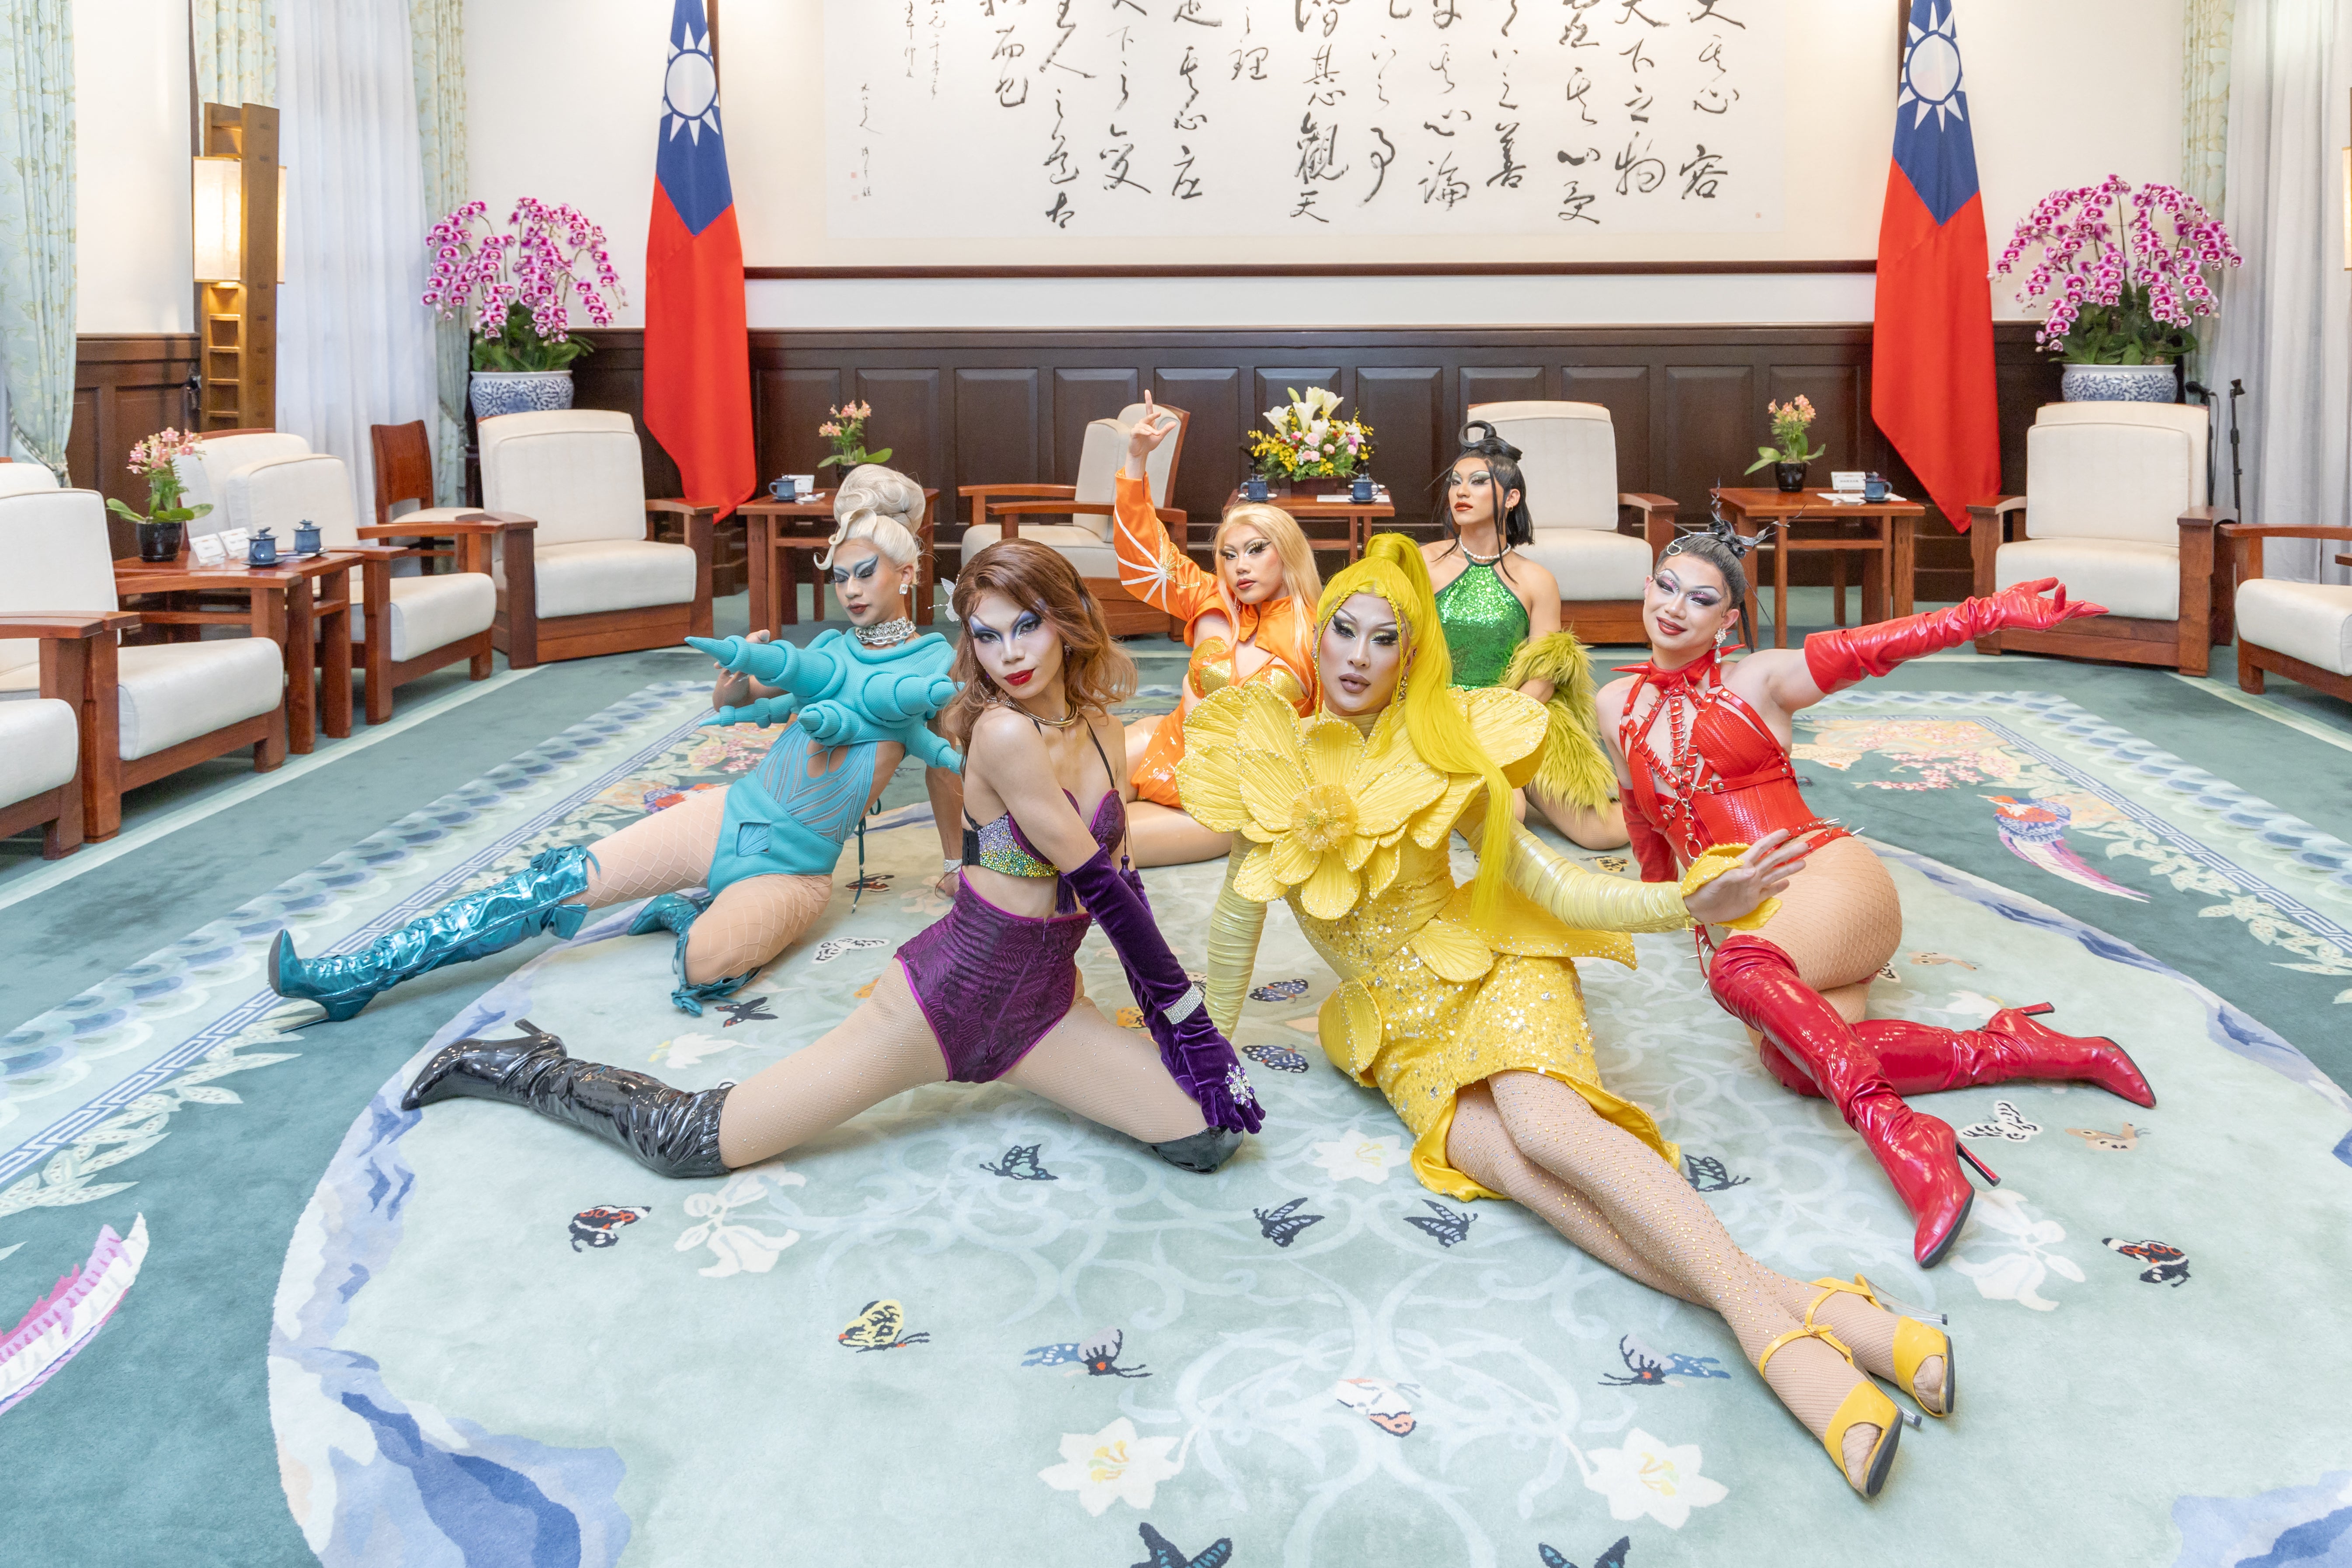 Nymphia Wind, dressed in yellow, and her team pose for photos at the presidential office in Taipei